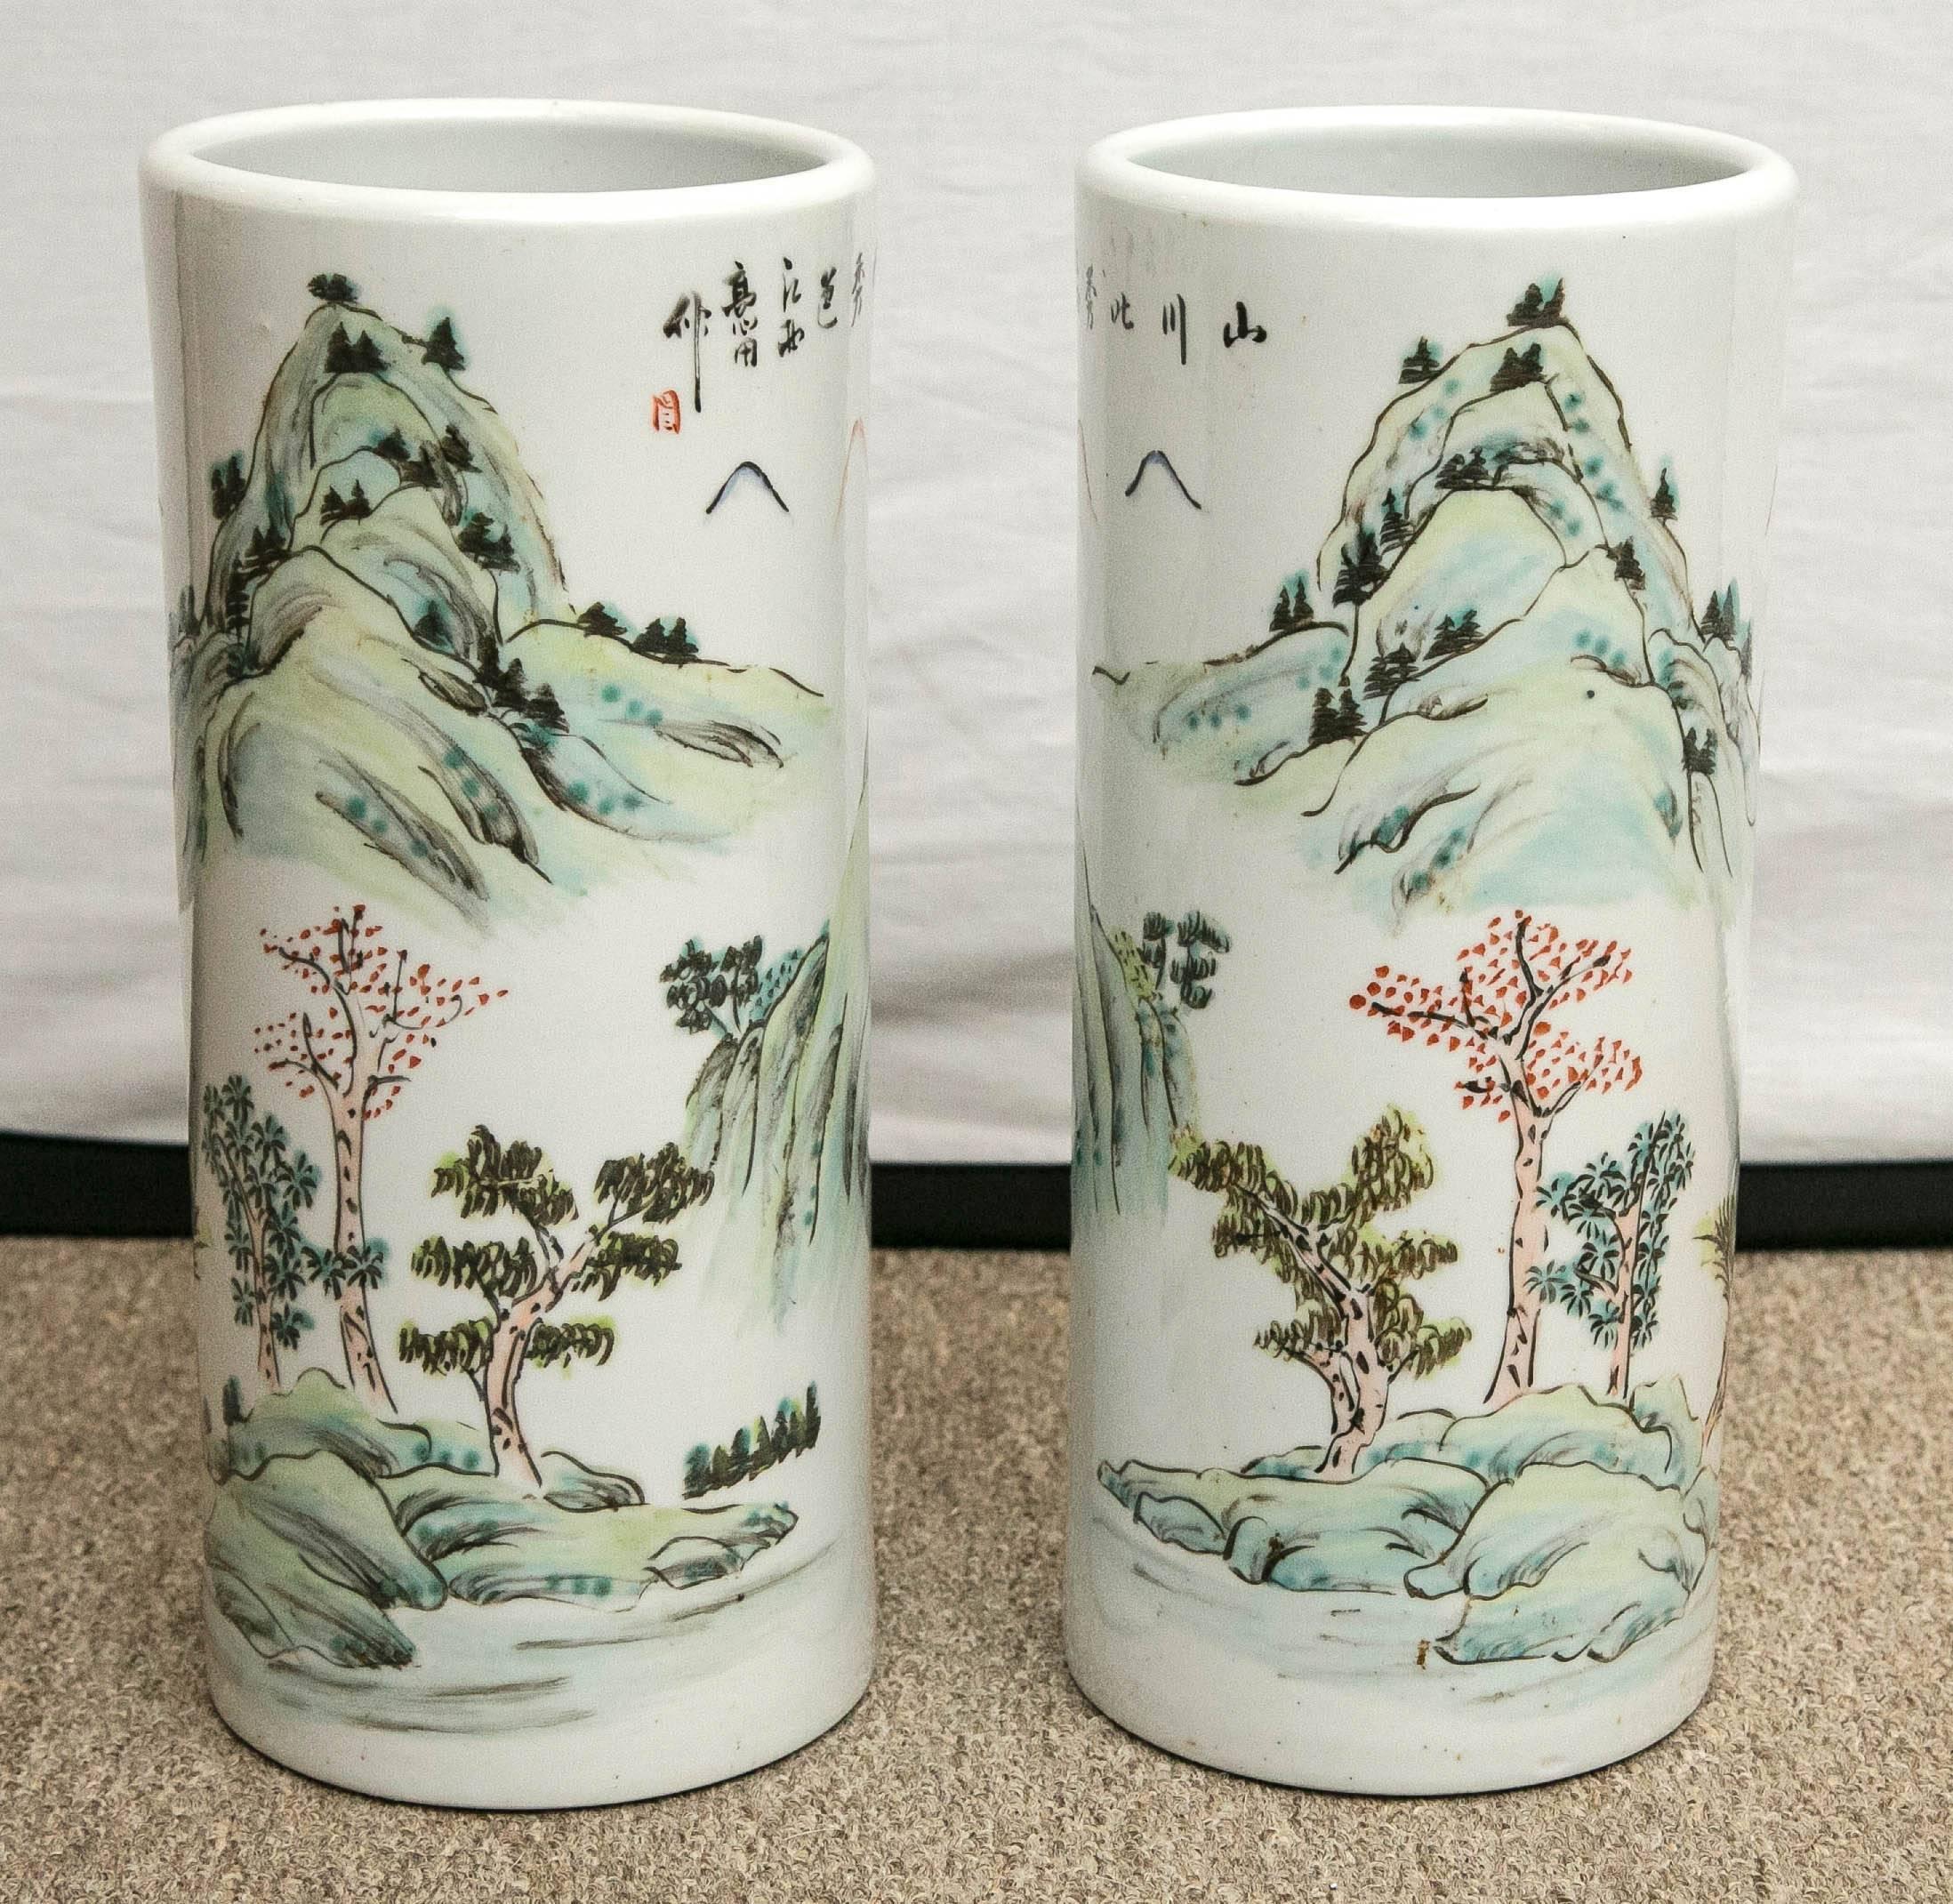 Pair of hand-painted Qian-jiang style porcelain hat stands. Republic period.